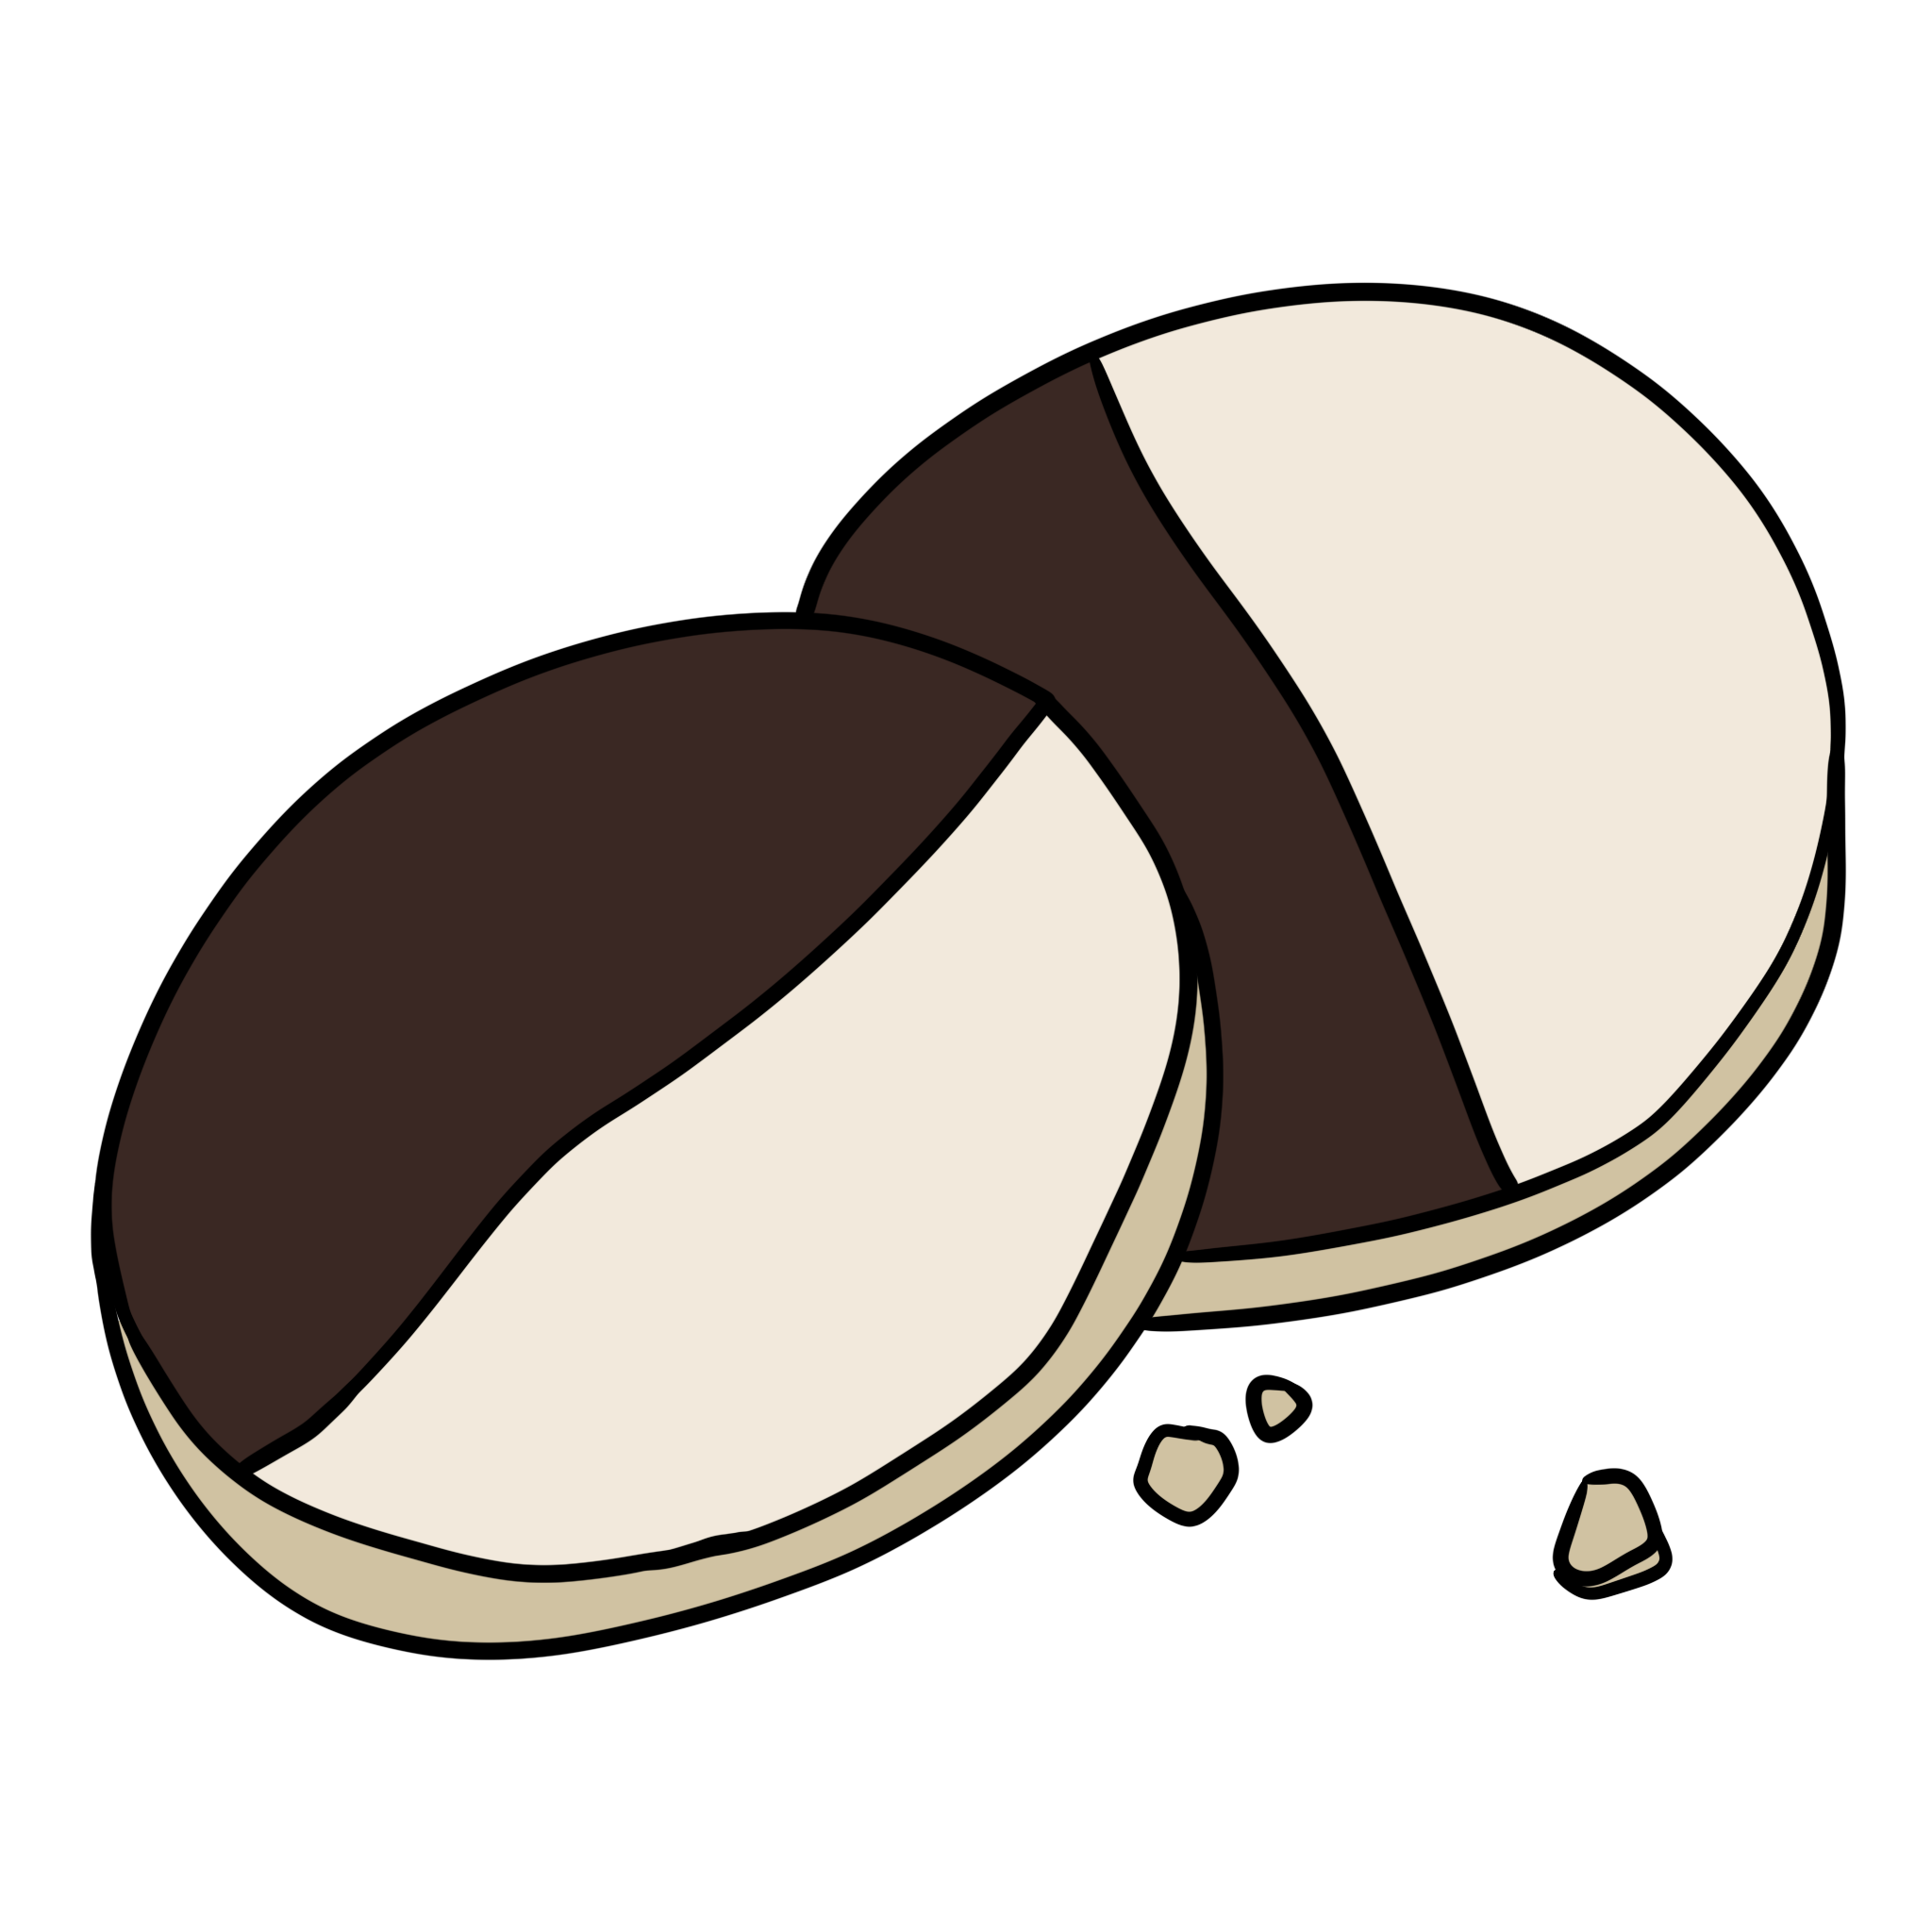  Two circular cookies, overlapping. Each is half dark brown and half white on top and sand colored on the thin edge. A few crumbs sit to the side.